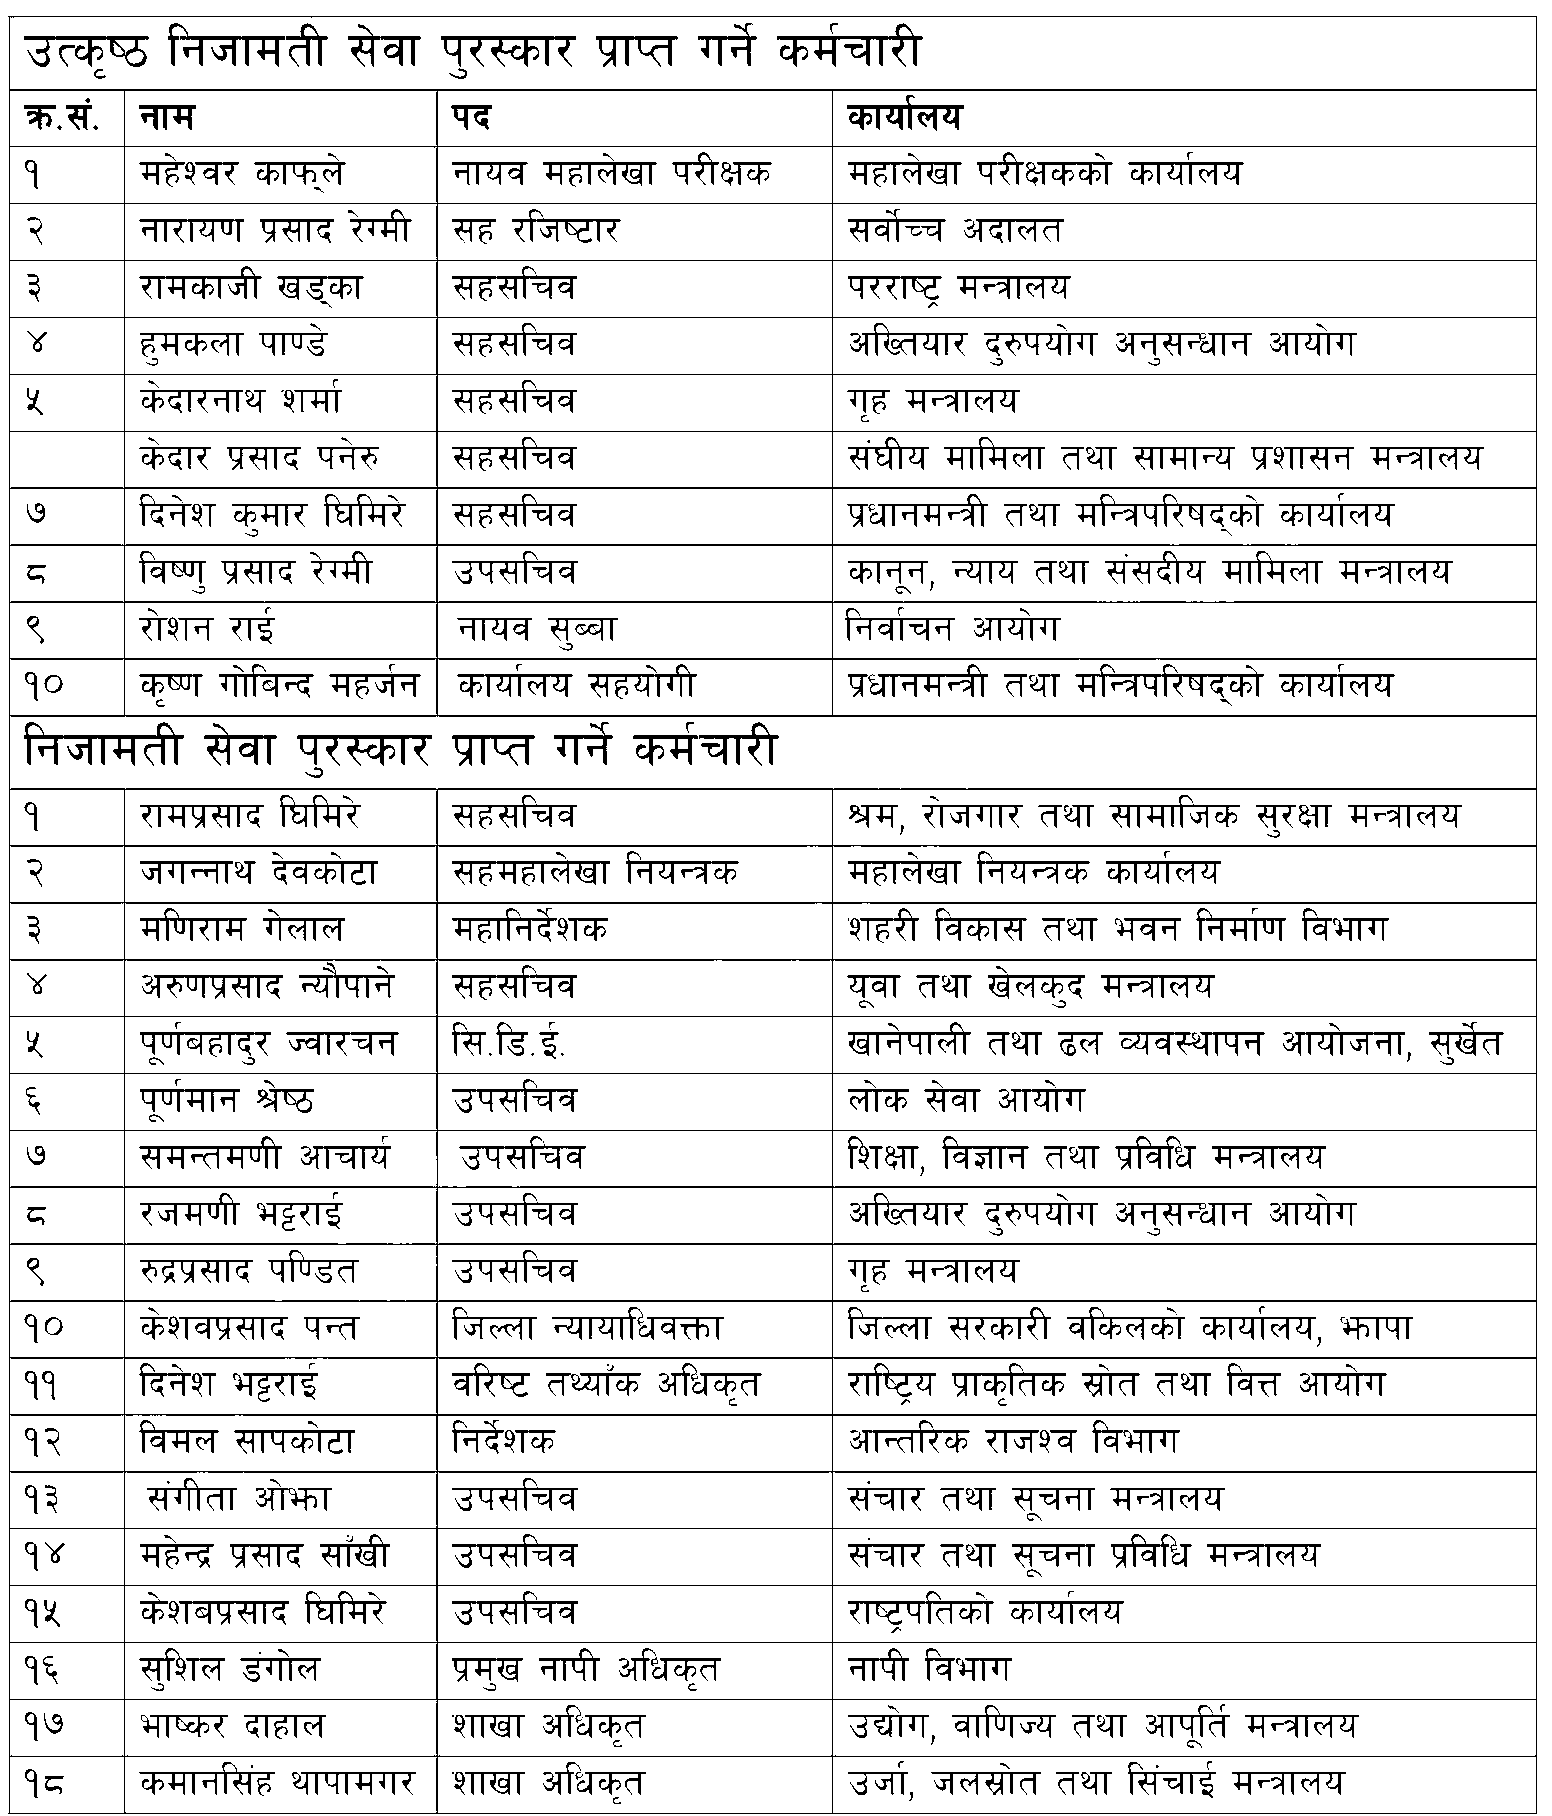 List of 40 Employees Awarded in 16th Civil Service Day